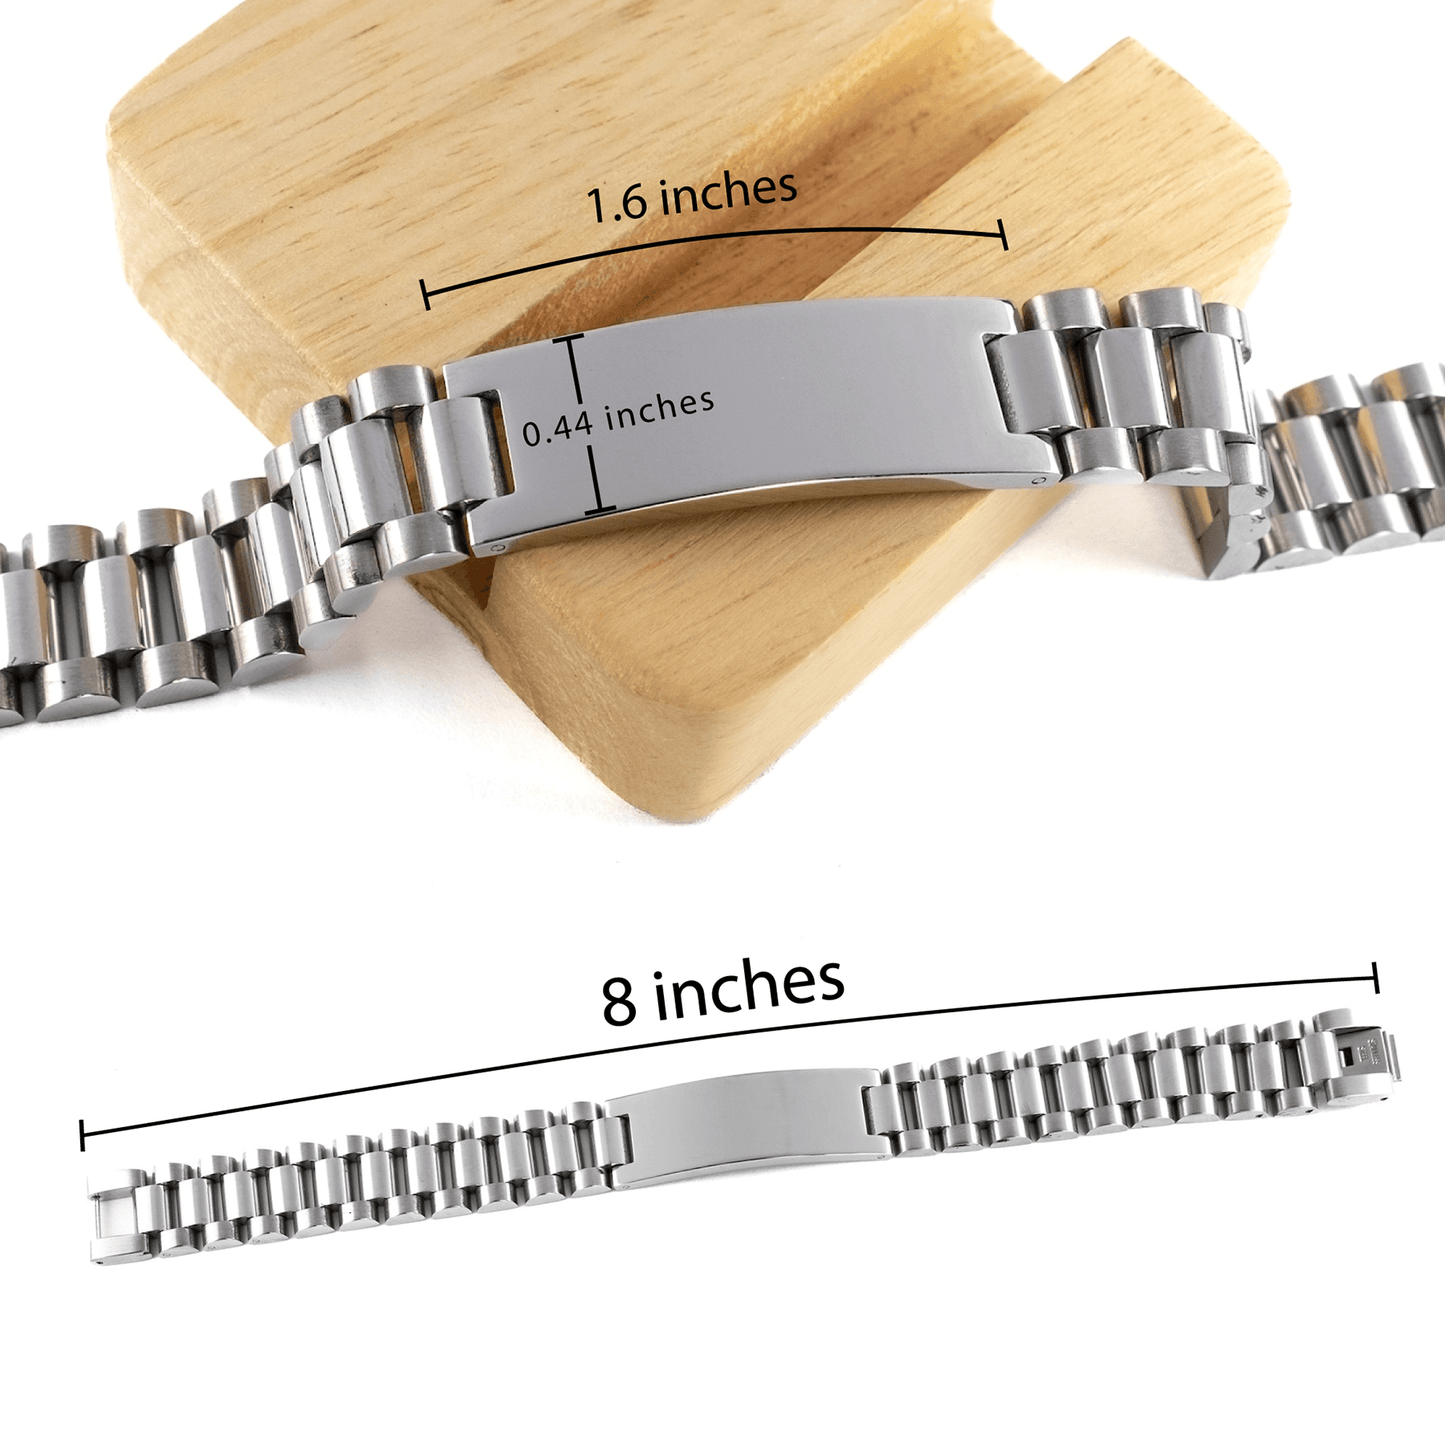 Naval Architect Ladder Stainless Steel Engraved Bracelet - Thanks for being who you are - Birthday Christmas Jewelry Gifts Coworkers Colleague Boss - Mallard Moon Gift Shop